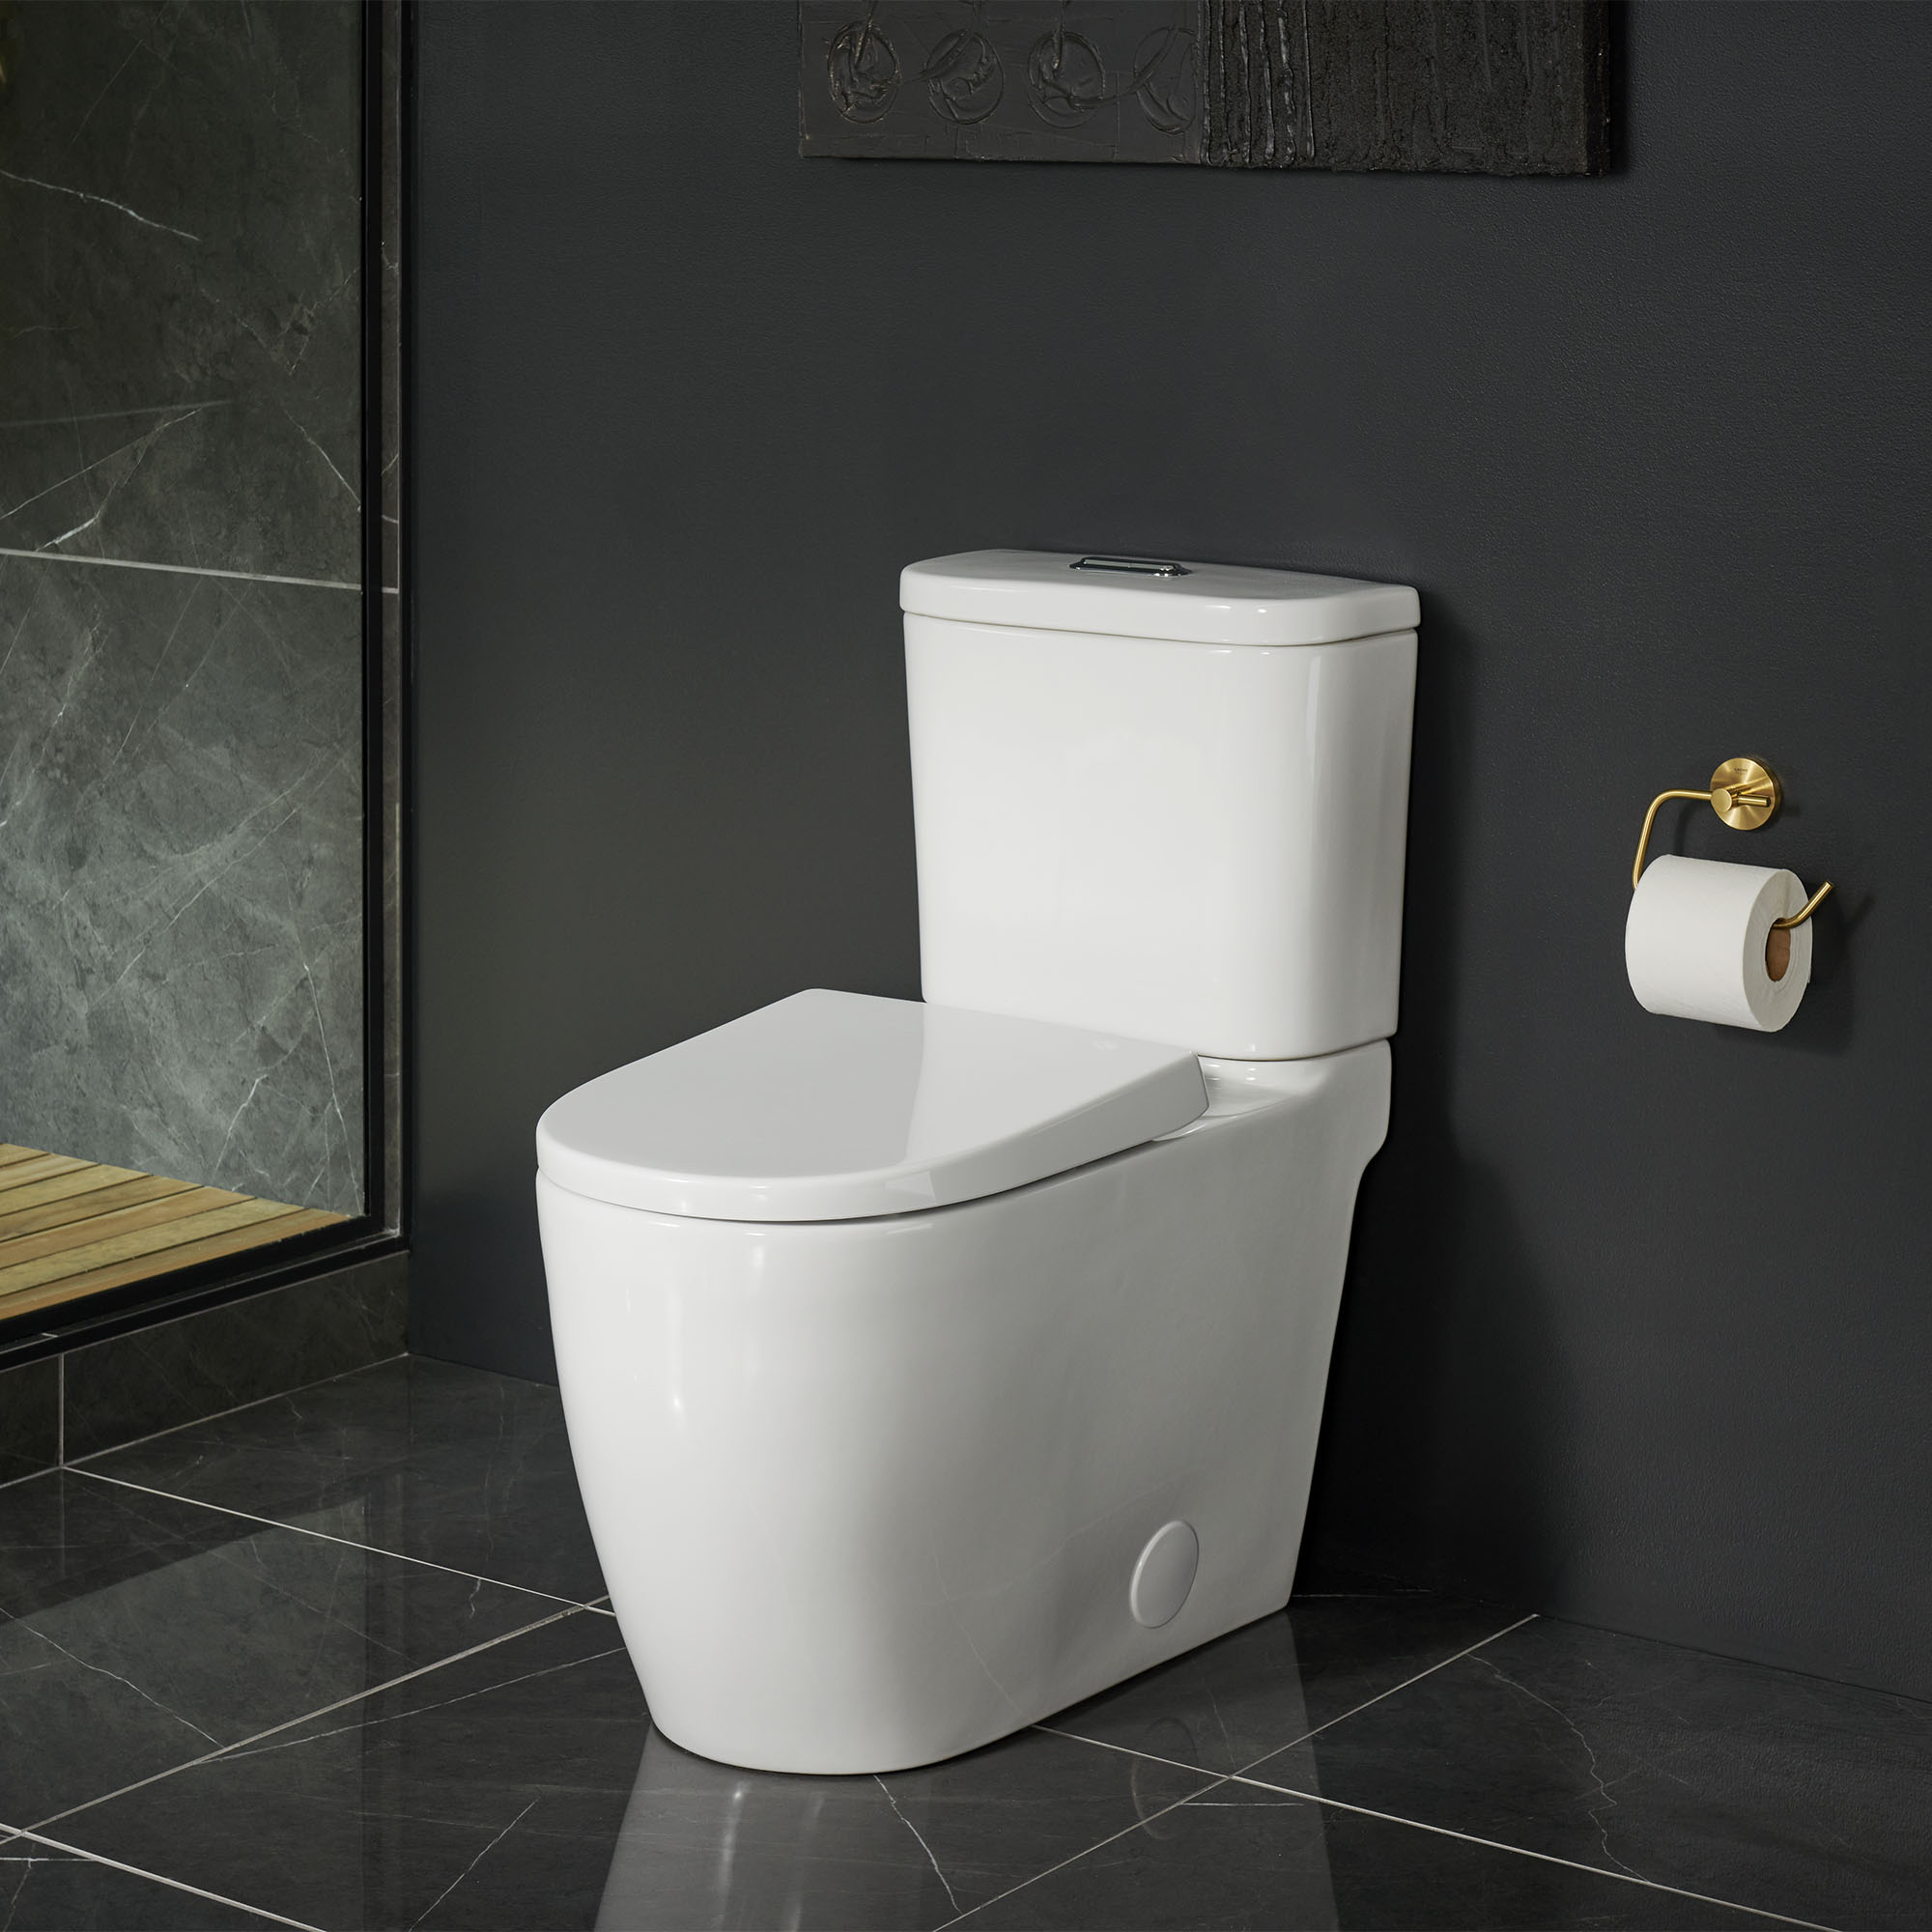 Two-piece Dual Flush Right Height Elongated Toilet with seat